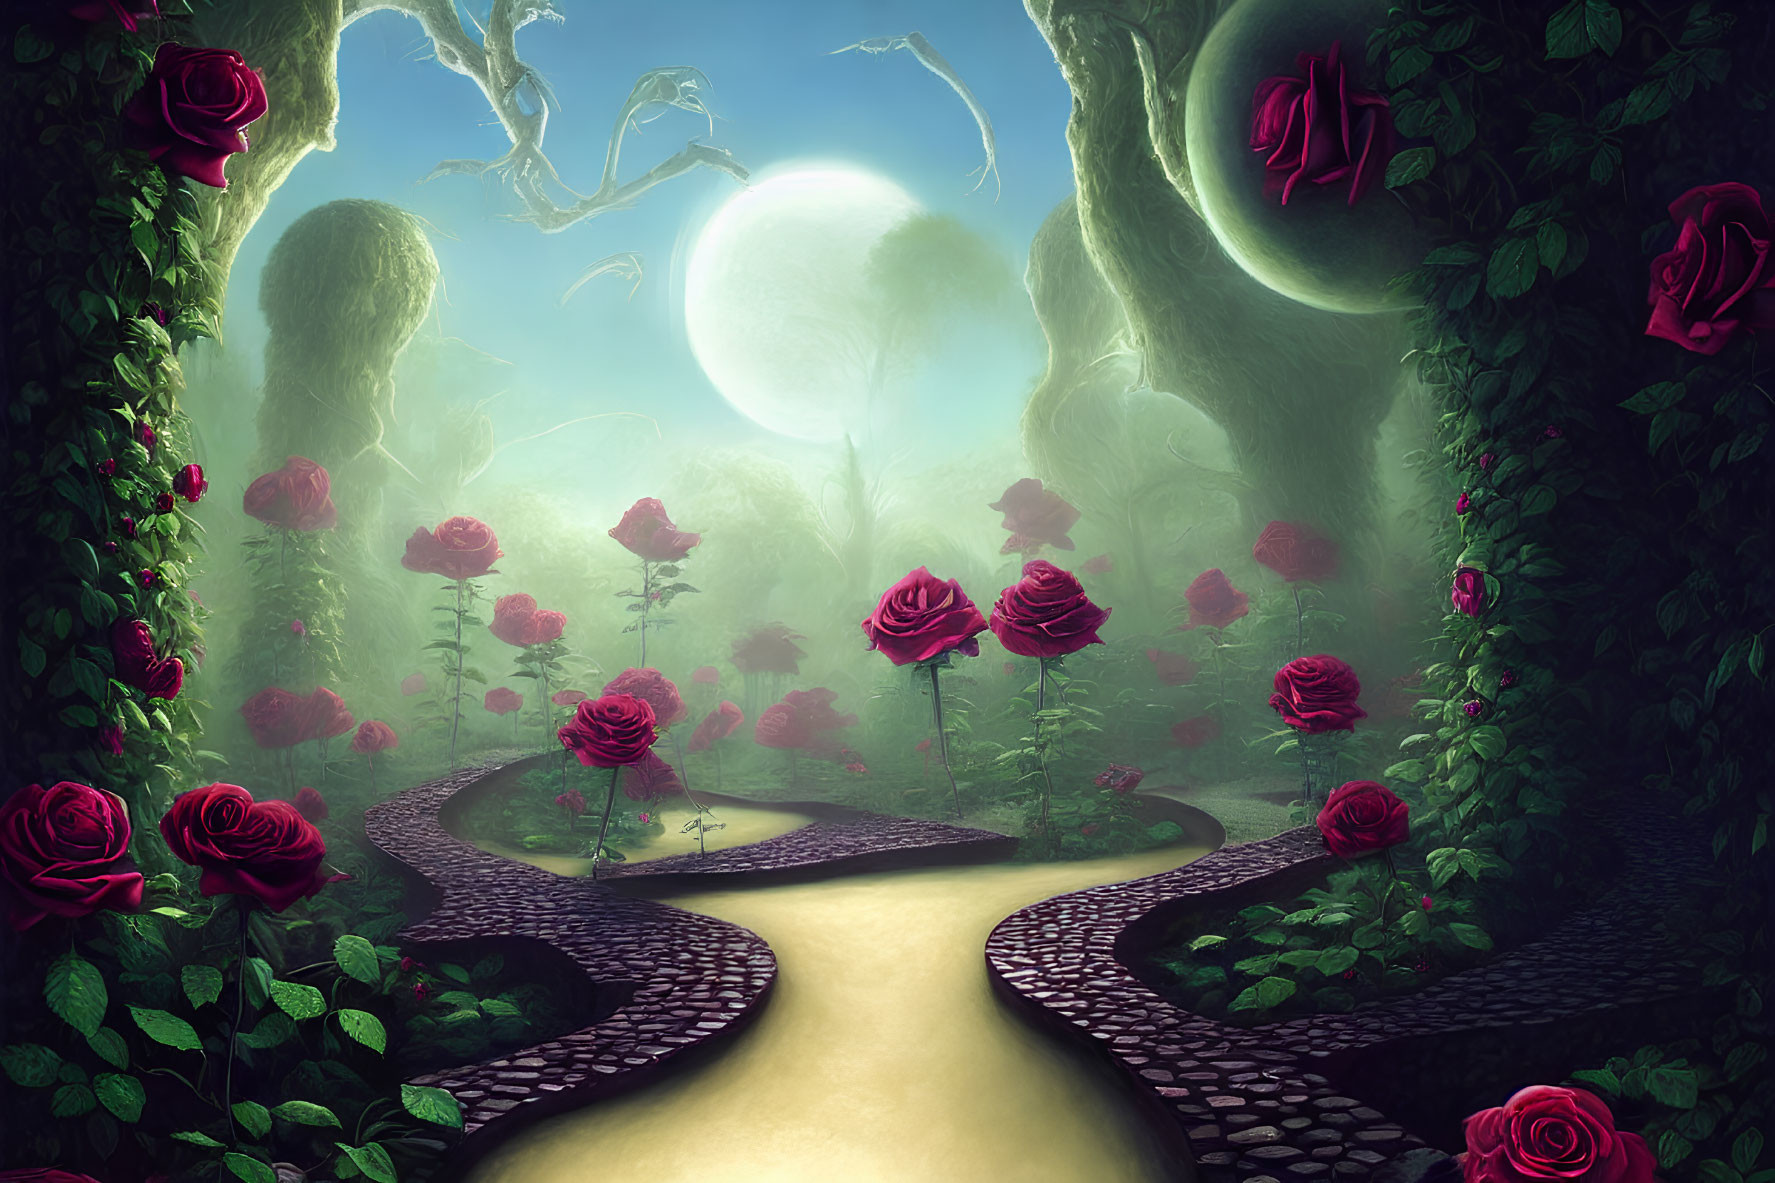 Enchanting garden with cobblestone paths, red roses, trees, and full moon